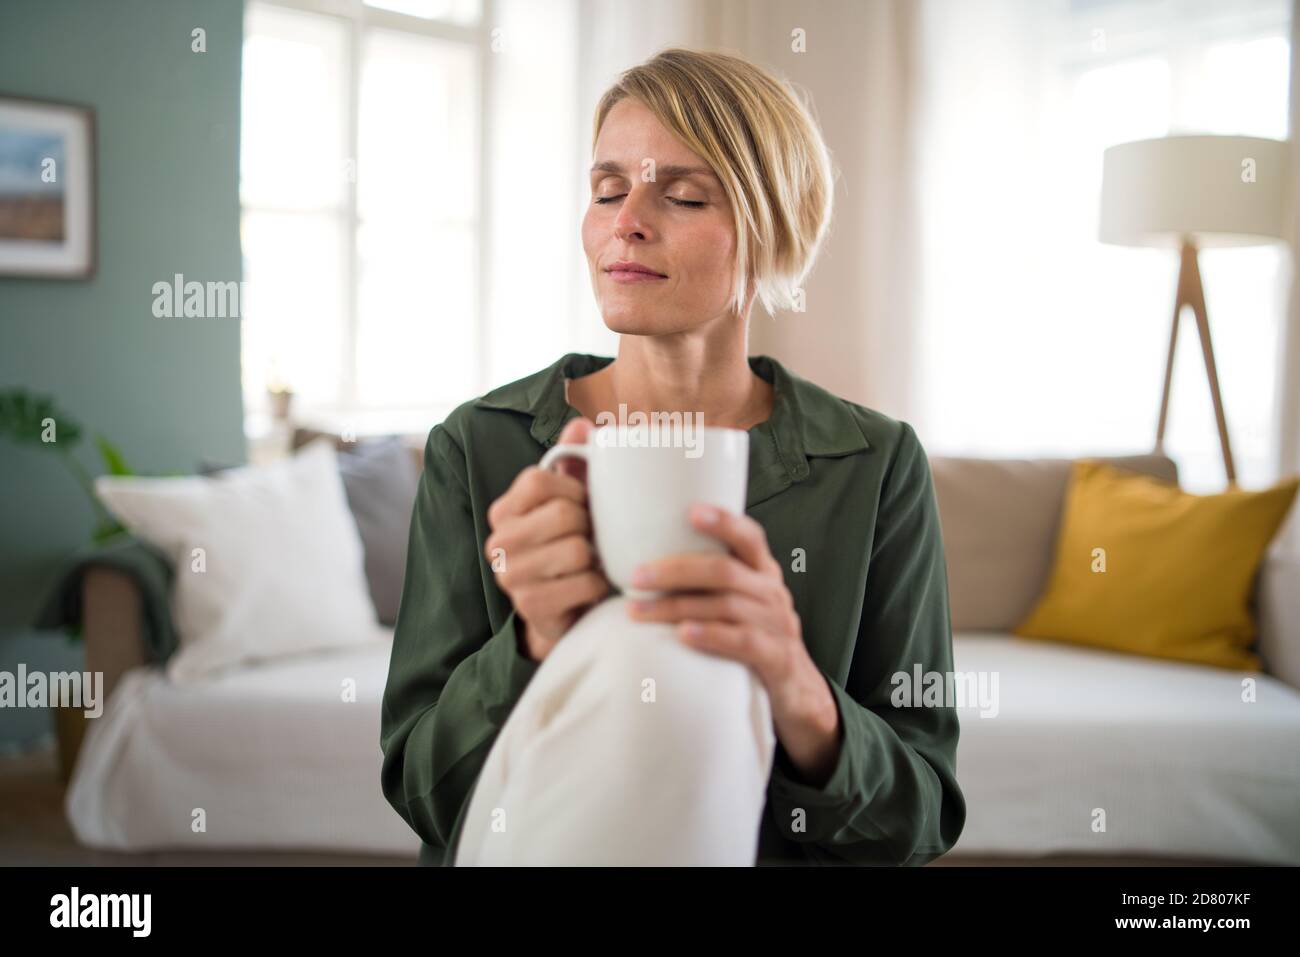 Portrait of woman meditating indoors in office, holding cup of tea. Stock Photo